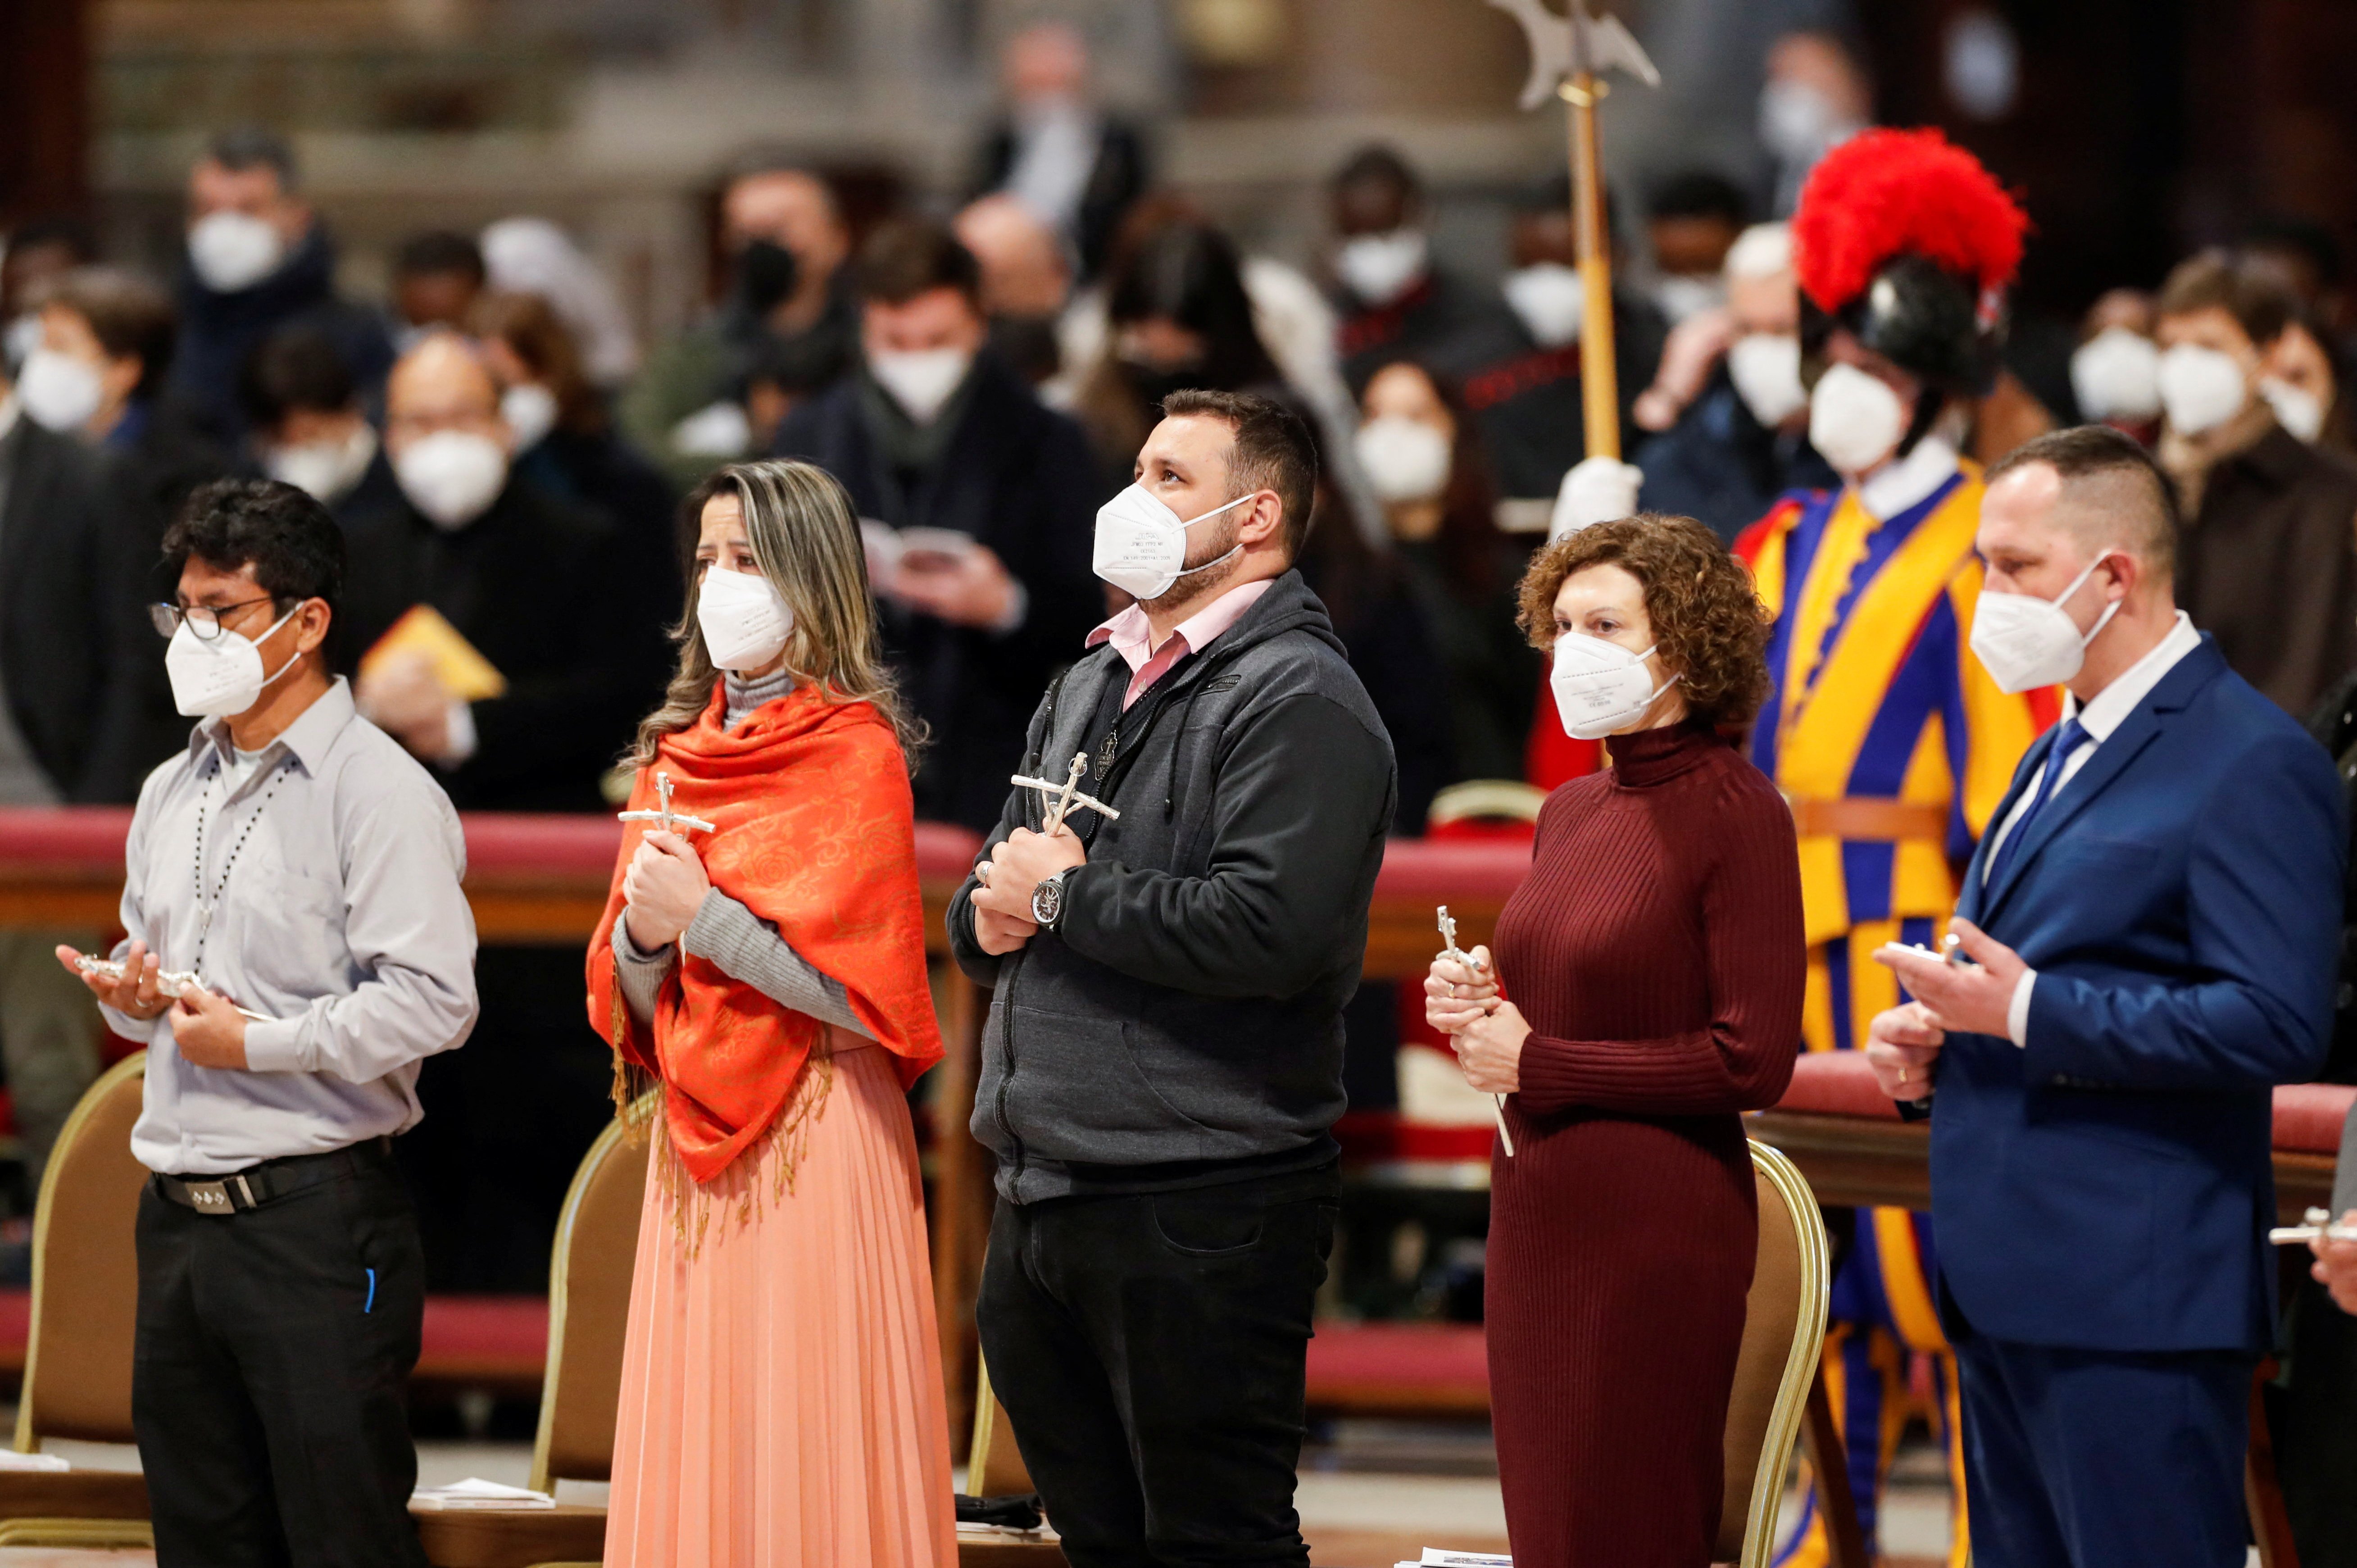 Catechists attend Pope Francis' celebration of Mass marking Sunday of the Word of God in St. Peter's Basilica at the Vatican Jan. 23, 2022. (CNS photo/Remo Casilli, Reuters)